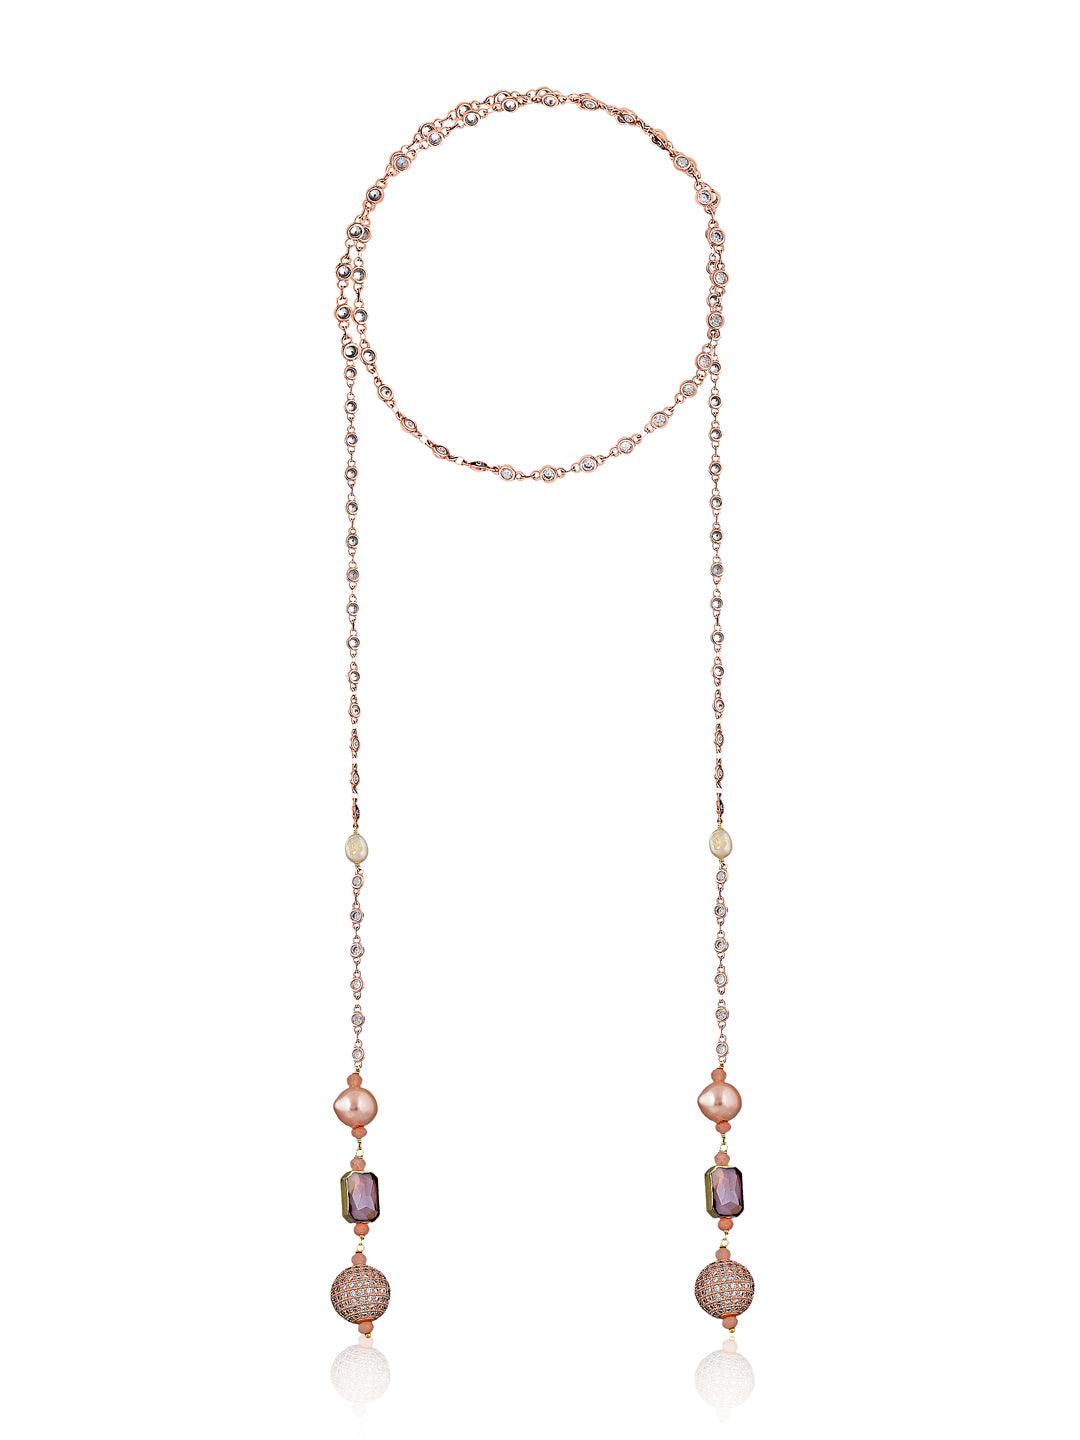 Crystal String Hydro Quartz Stone Appeal Scarf Necklace - Curio Cottage 